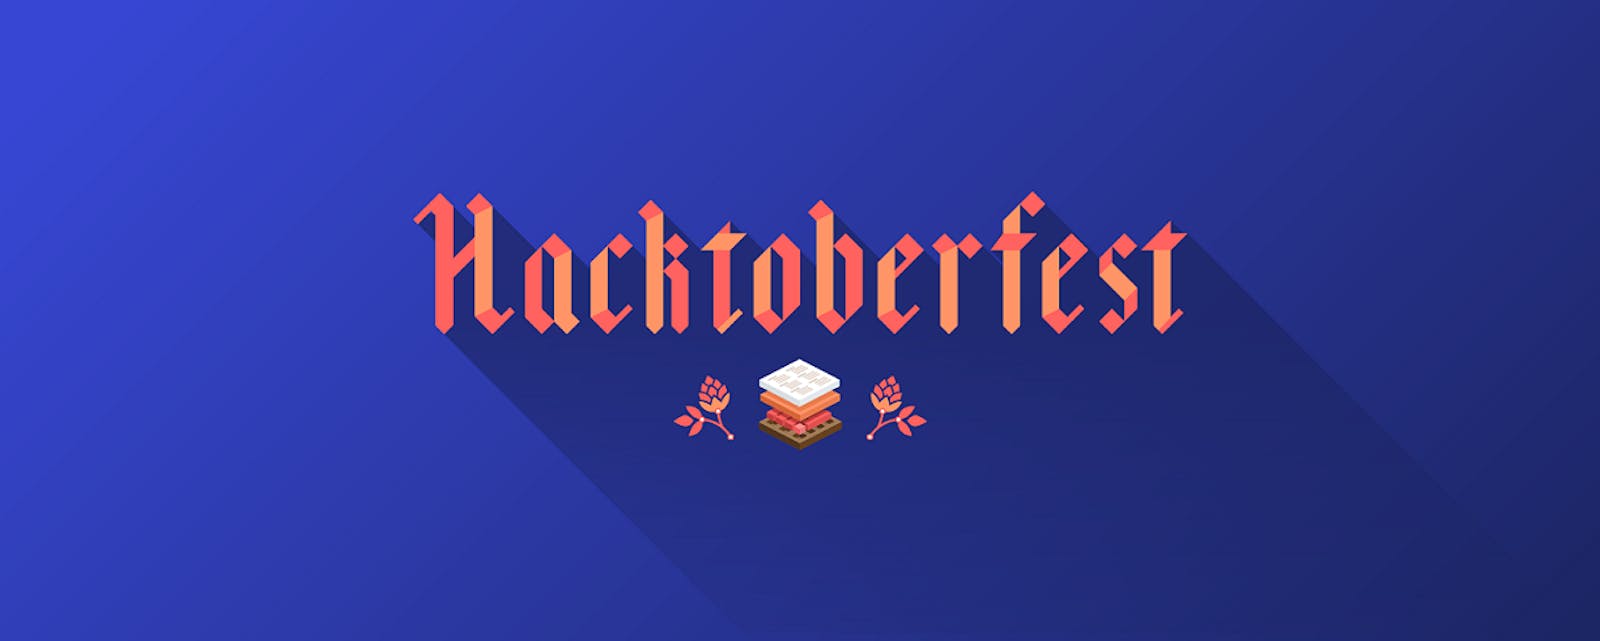 Starting with Open Source & Hacktoberfest. A 3-year review